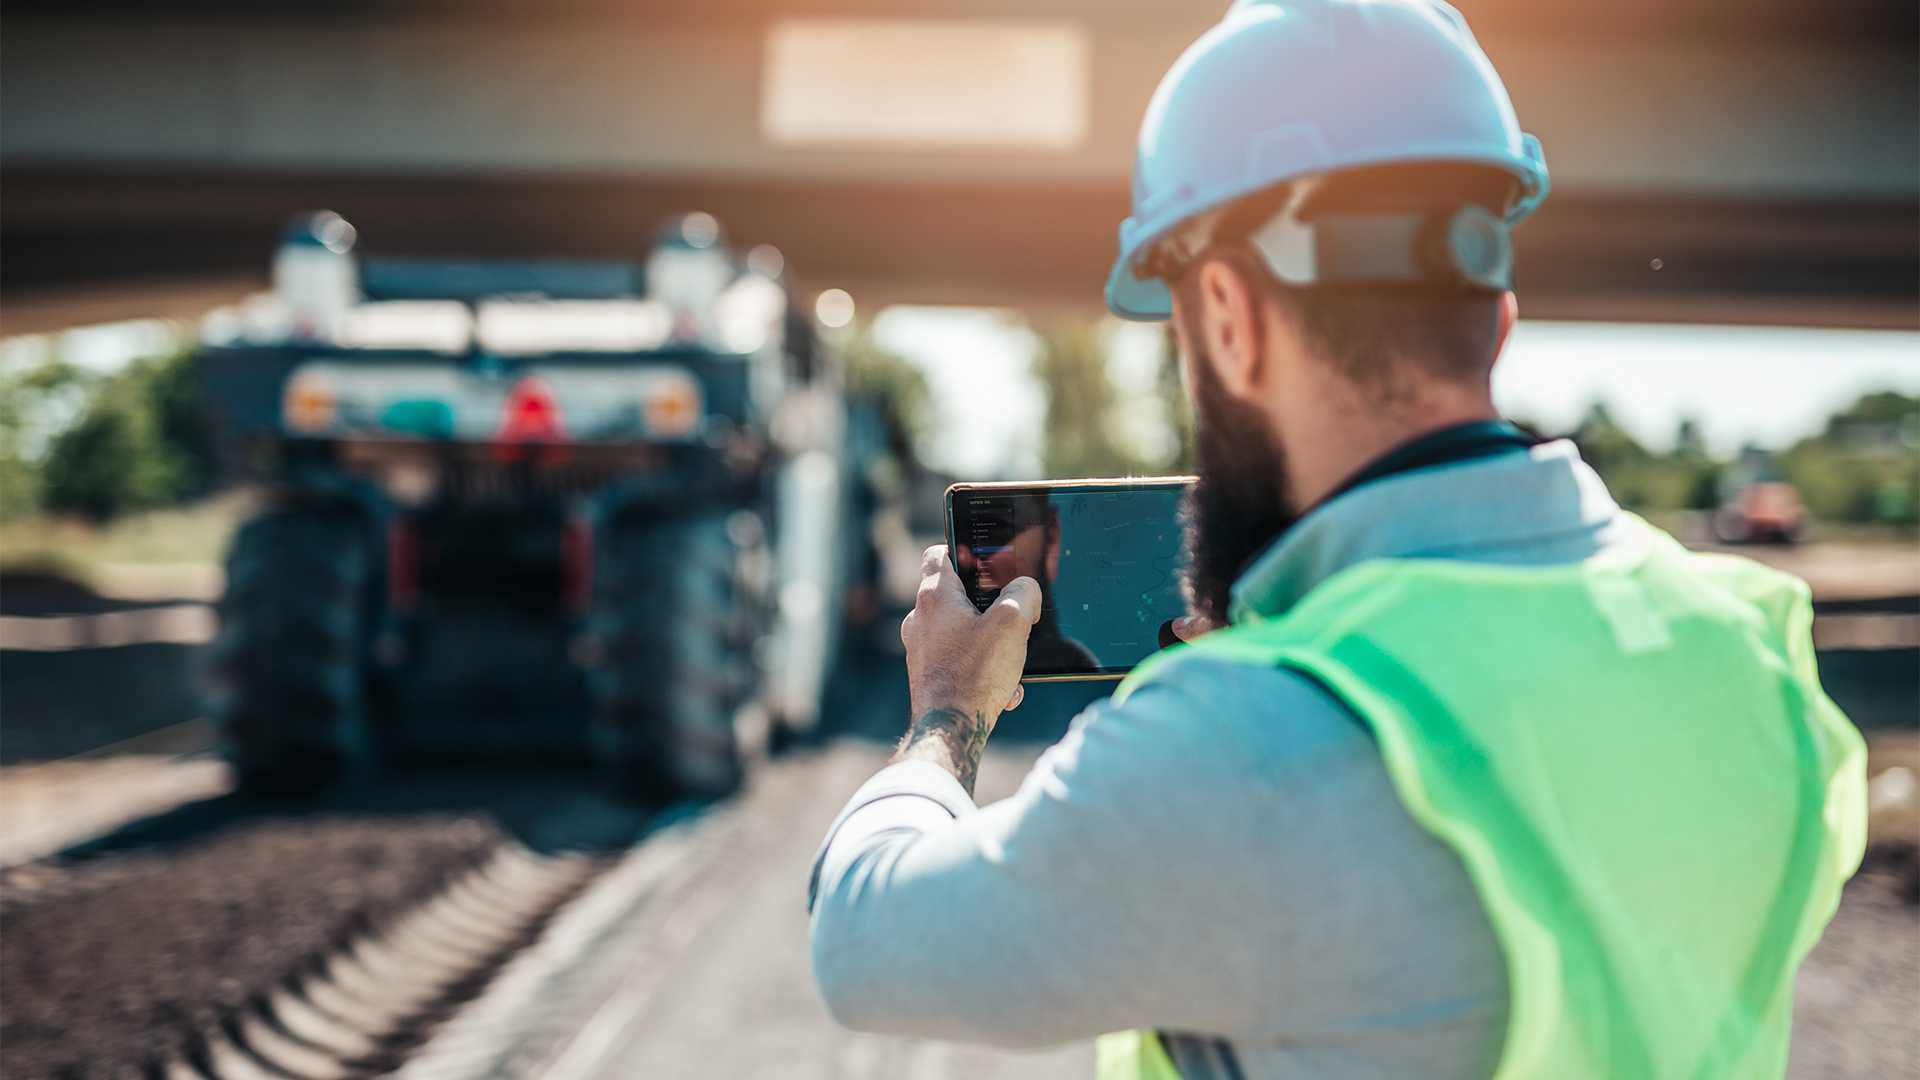 Close up of a man with a device inspecting a heavy machine in the background